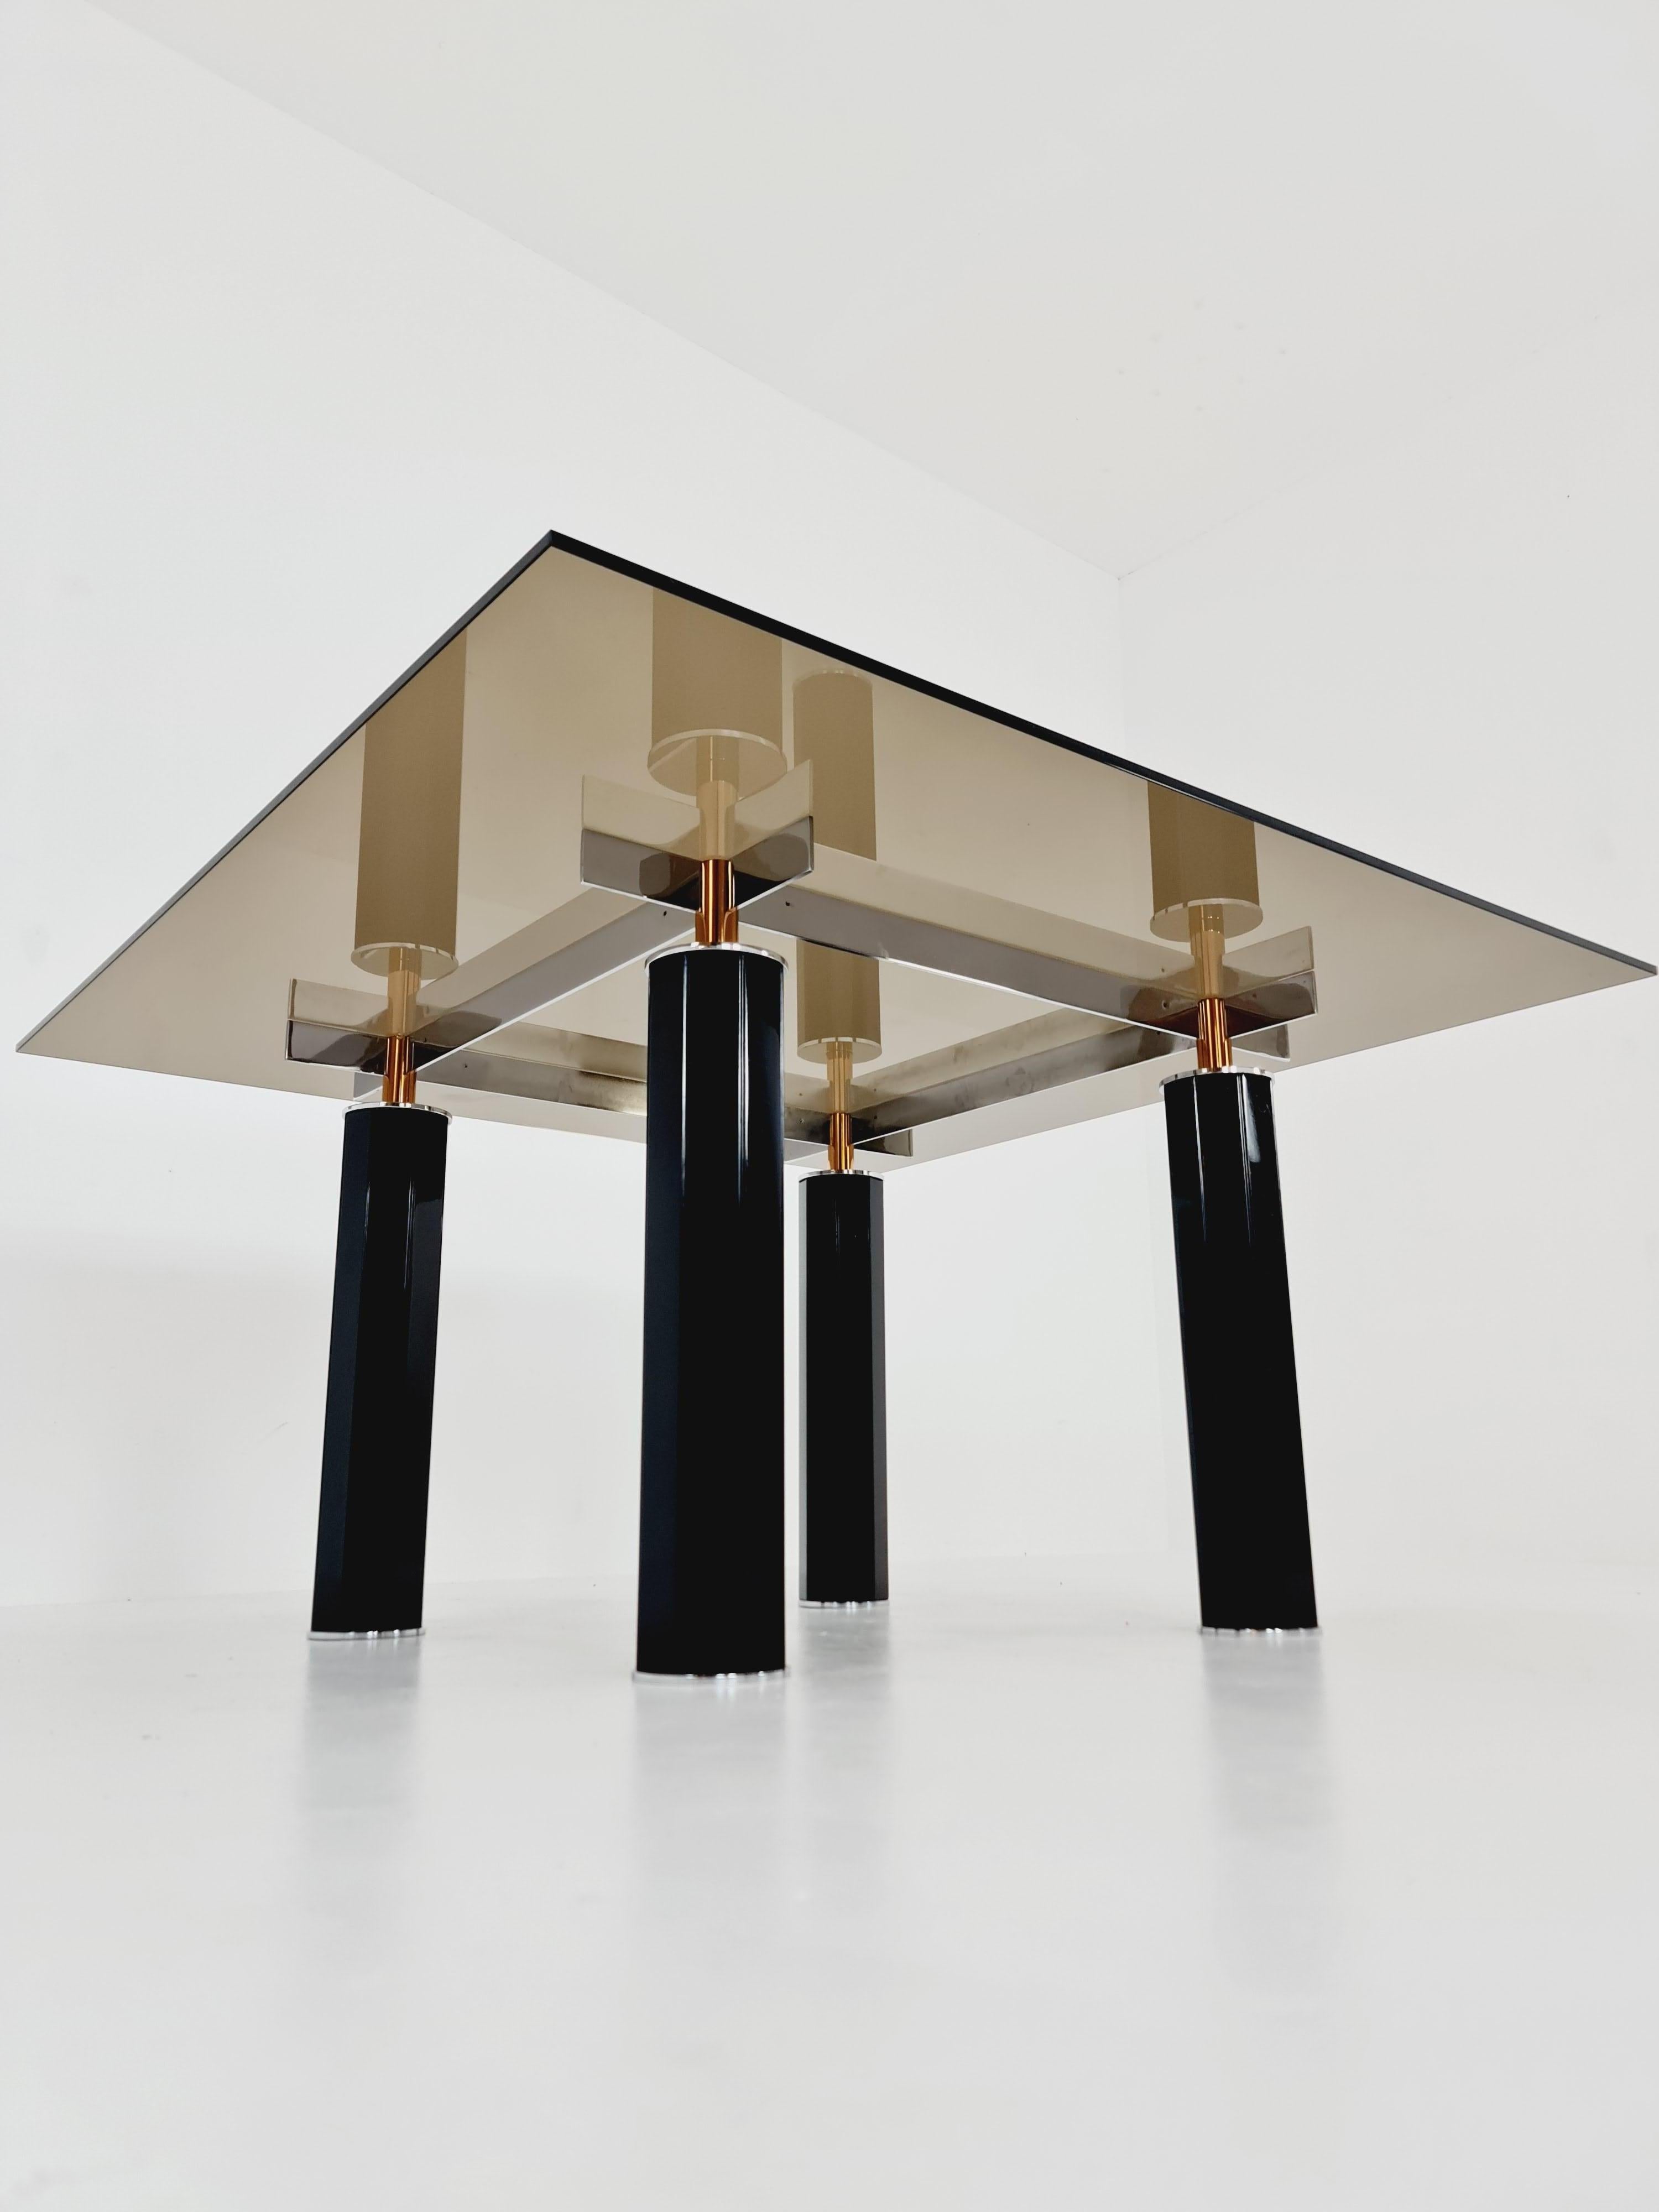 4 Totem dining chairs by Torstein Nilsen for Westnofa, Italian design table In Good Condition For Sale In Gaggenau, DE